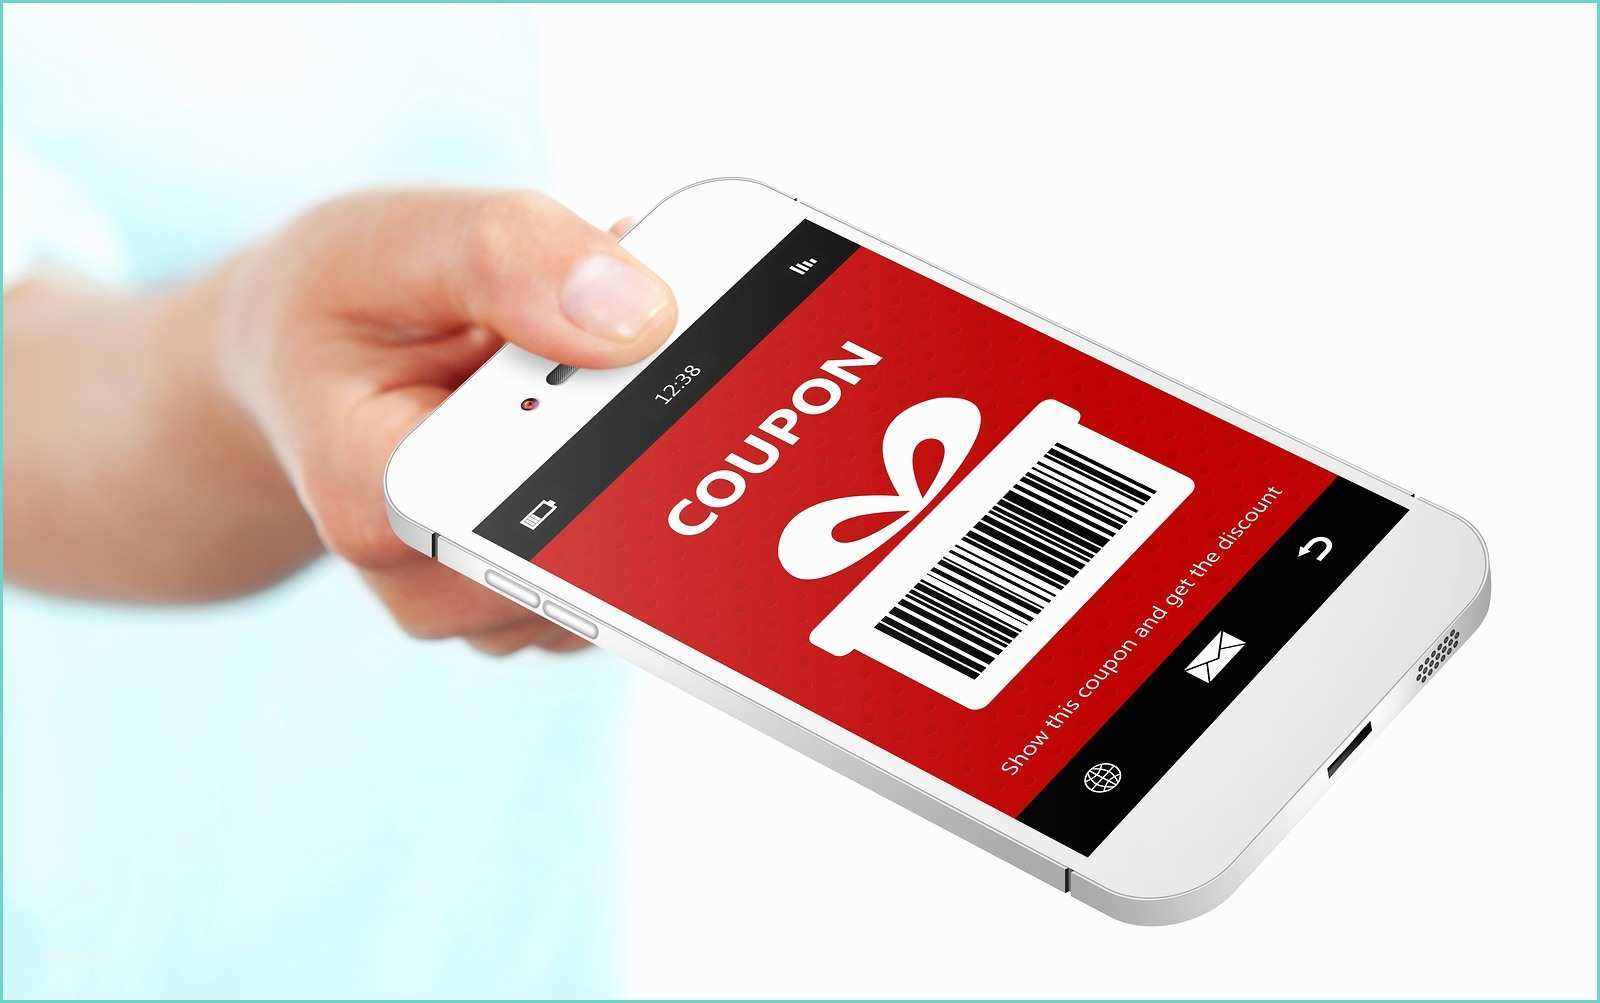 Bigstock Promo Code App Based Promotions and Digital Coupons